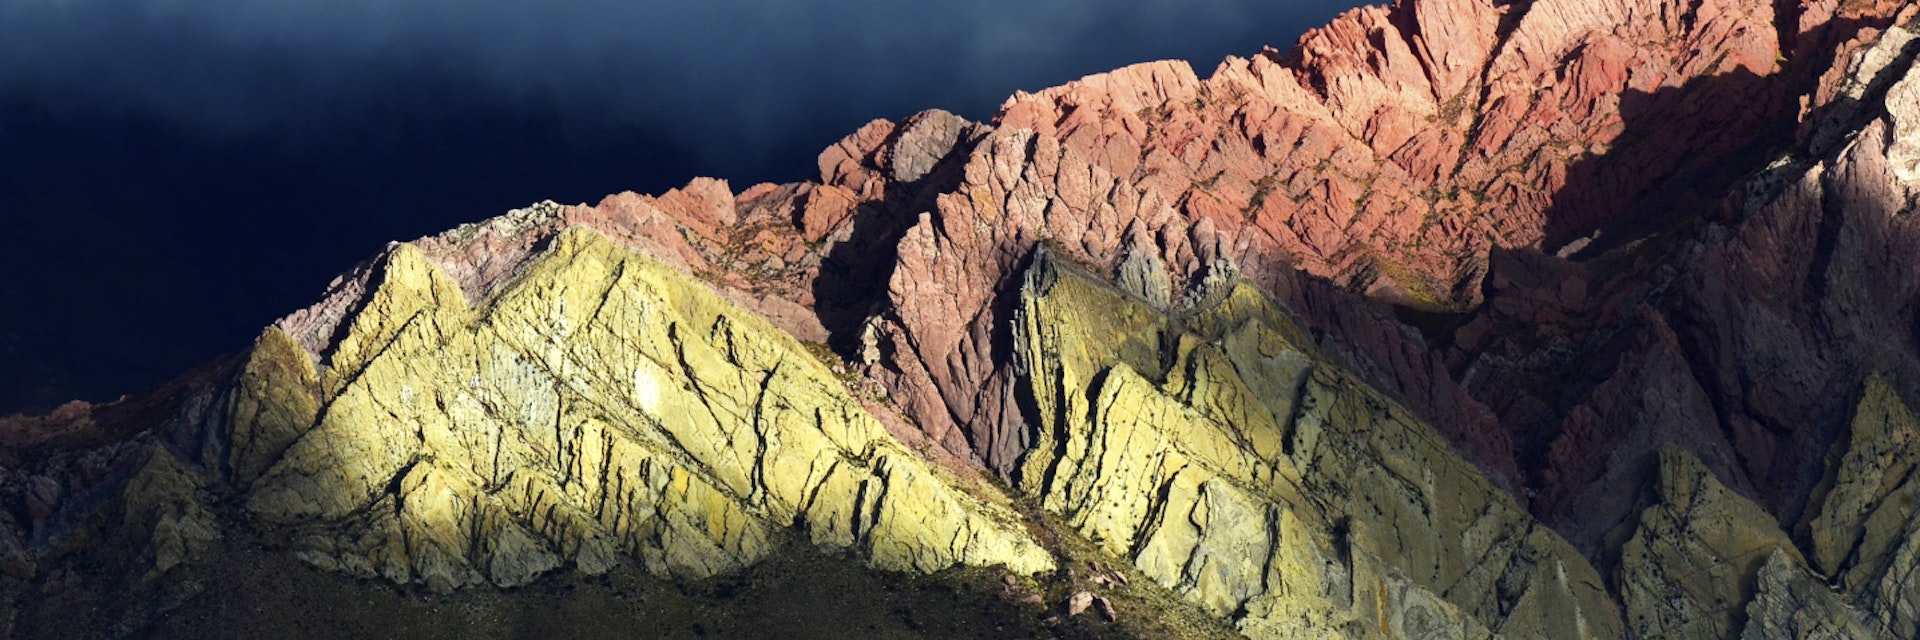 500px Photo ID: 101802245 - The Quebrada de Humahuaca rises far above the small town of Jujuy, Argentina....Jujuy is pronounced "Who-Who-E". It is such a magnificent mountain range that words are difficult to describe it. The colors and shapes are truly like nothing else I have personally seen and photographed in my journeys around the world. .I took this photograph while standing at 4300 meters in Argentina. Having spent a few months at sea level my head felt like it would split in two or maybe two hundred pieces. This mountain range is magical and I had to wait to see what light I would get on my subject. I have never felt the effects of altitude before but I feel the wait and the pain were worth my time. Argentina and all of South America holds some incredible sights and I hope you enjoy this one...Cheers Bob